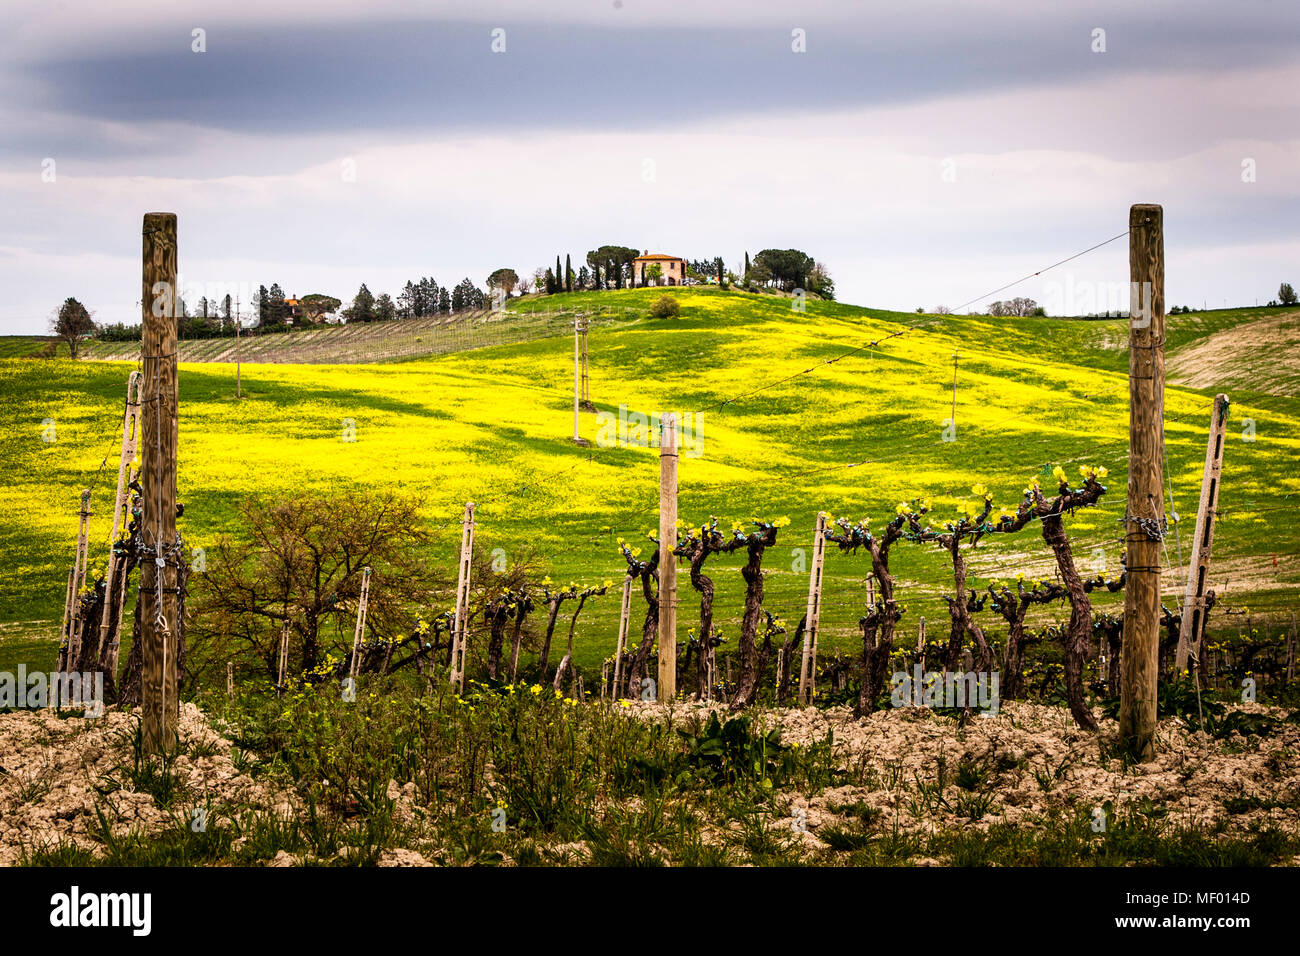 Tuscan landscape in spring, green fields, cypreses and olive trees, hiking in Tuscany, Brunello vines near Montalcino, Italy Stock Photo